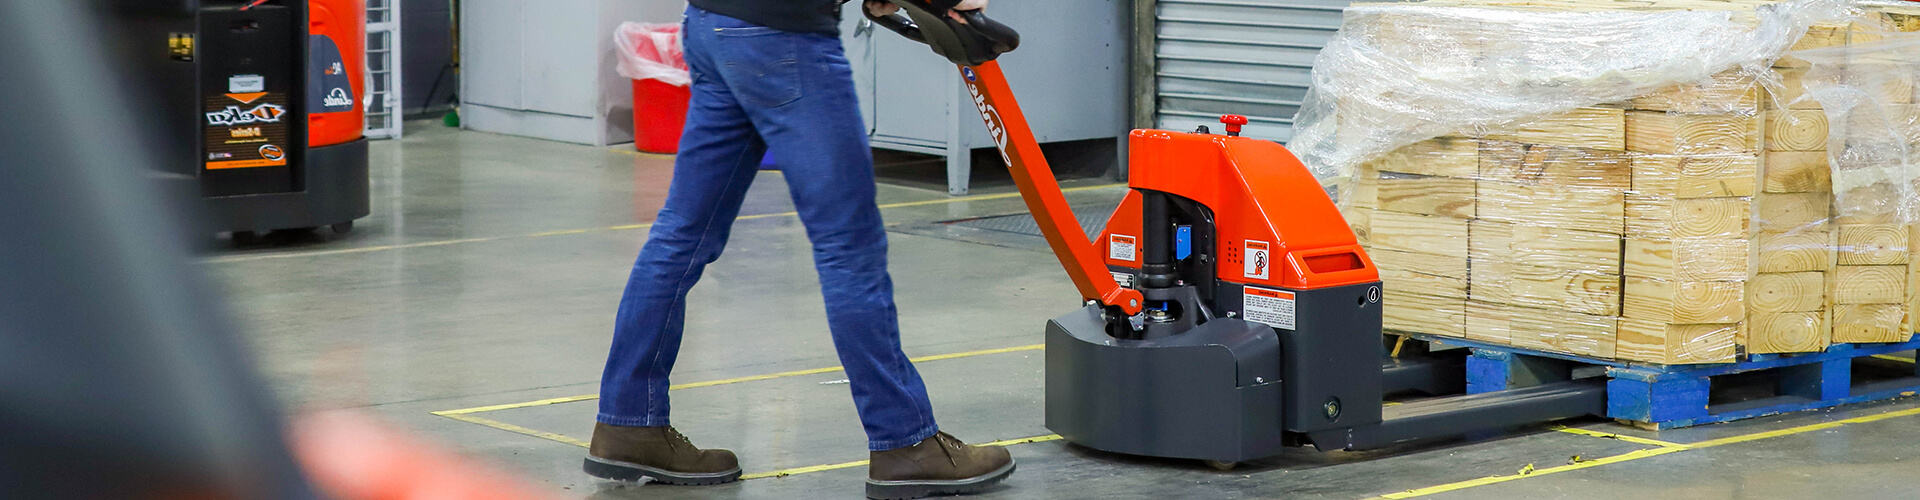 Person working with an industrial hand pallet truck loading a wooden pallet